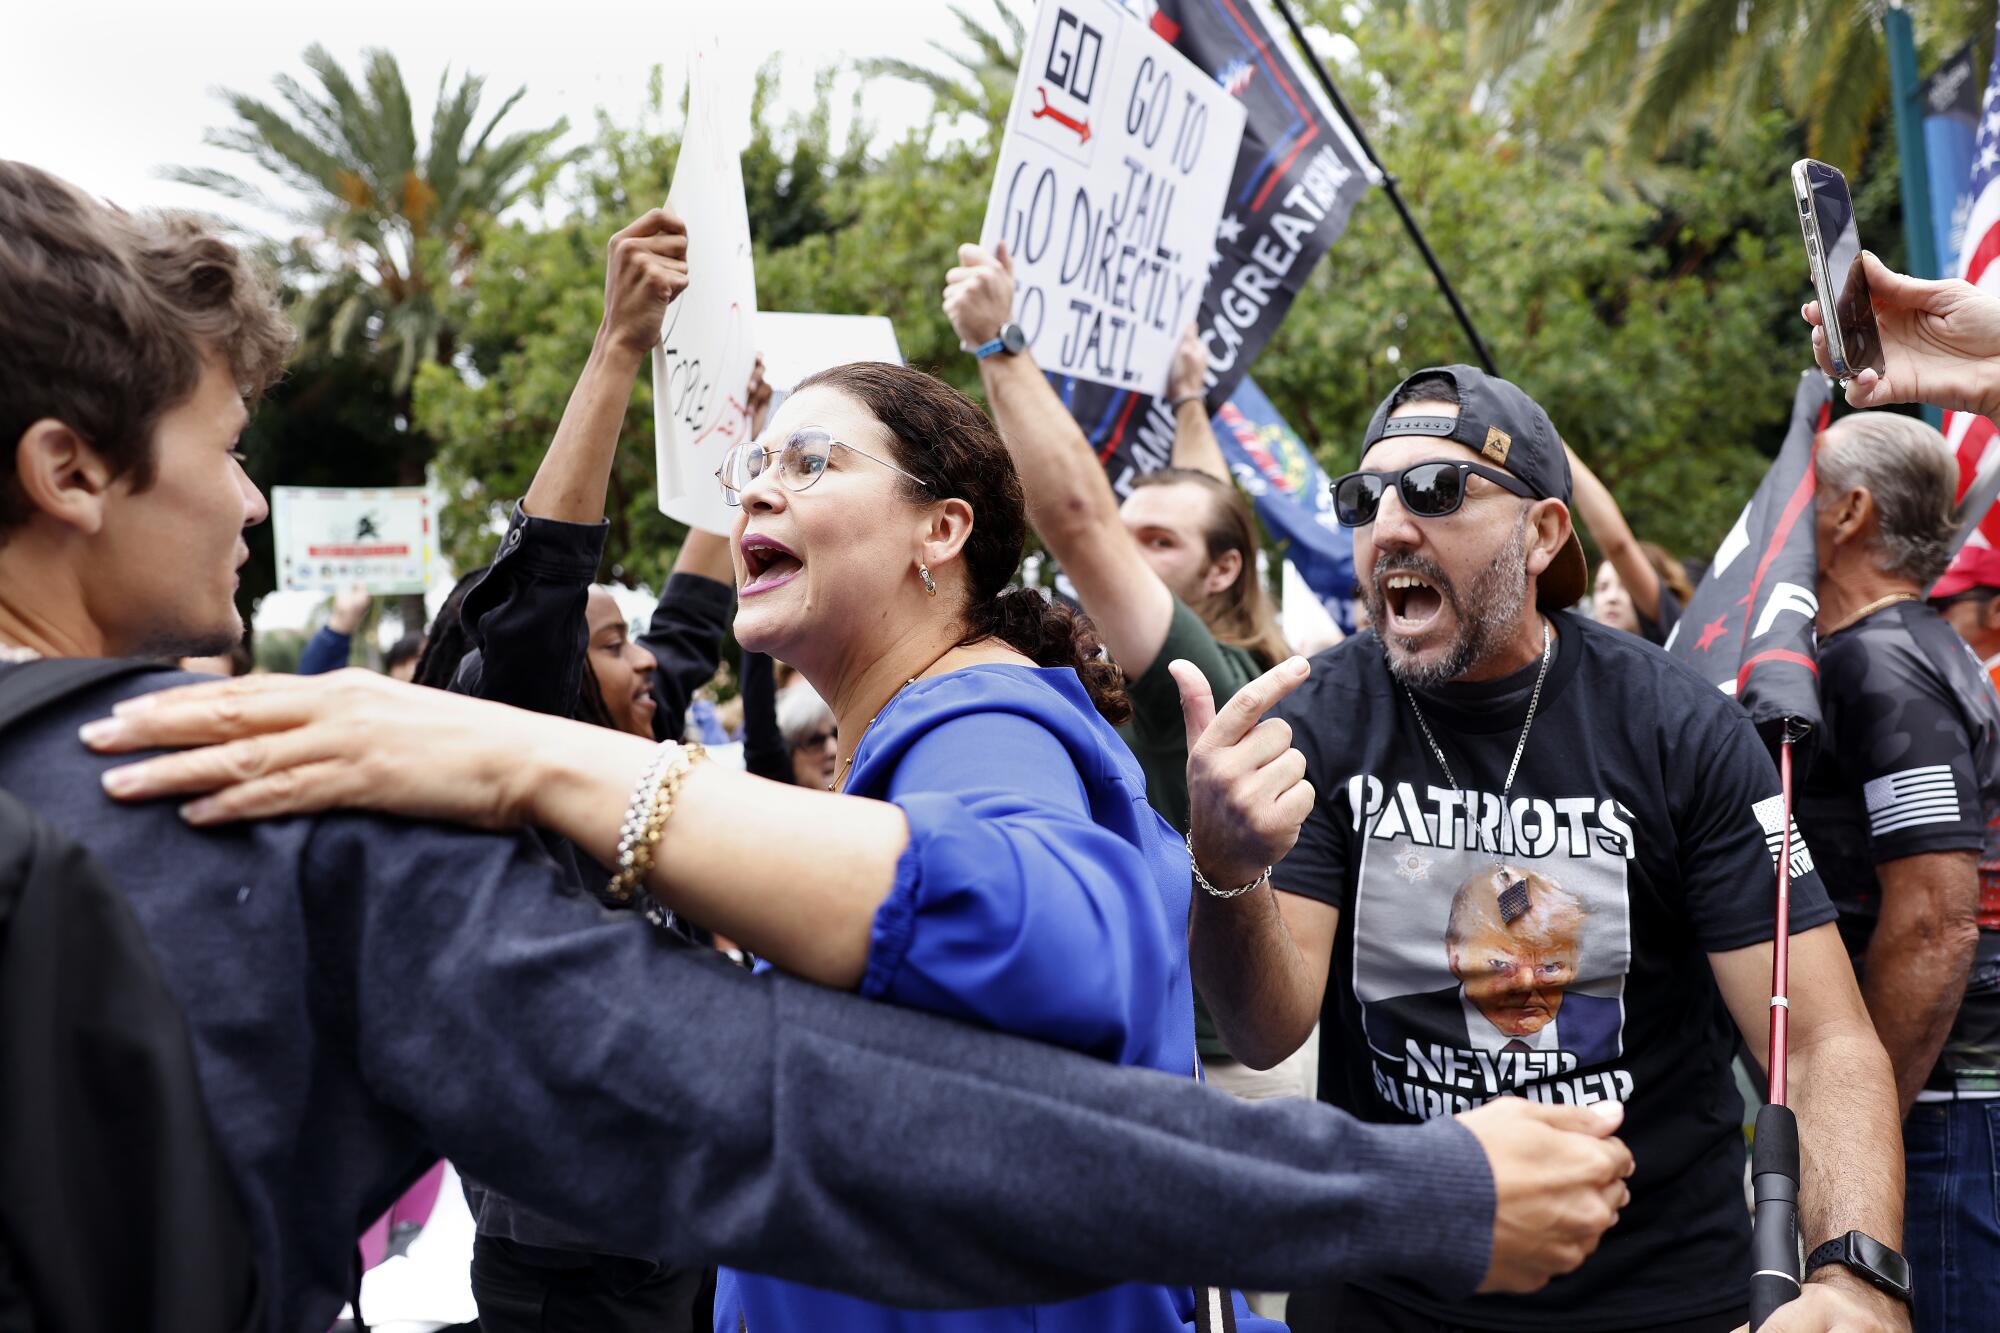 A confrontation outside the California Republican Party Convention at the Anaheim Marriott Hotel